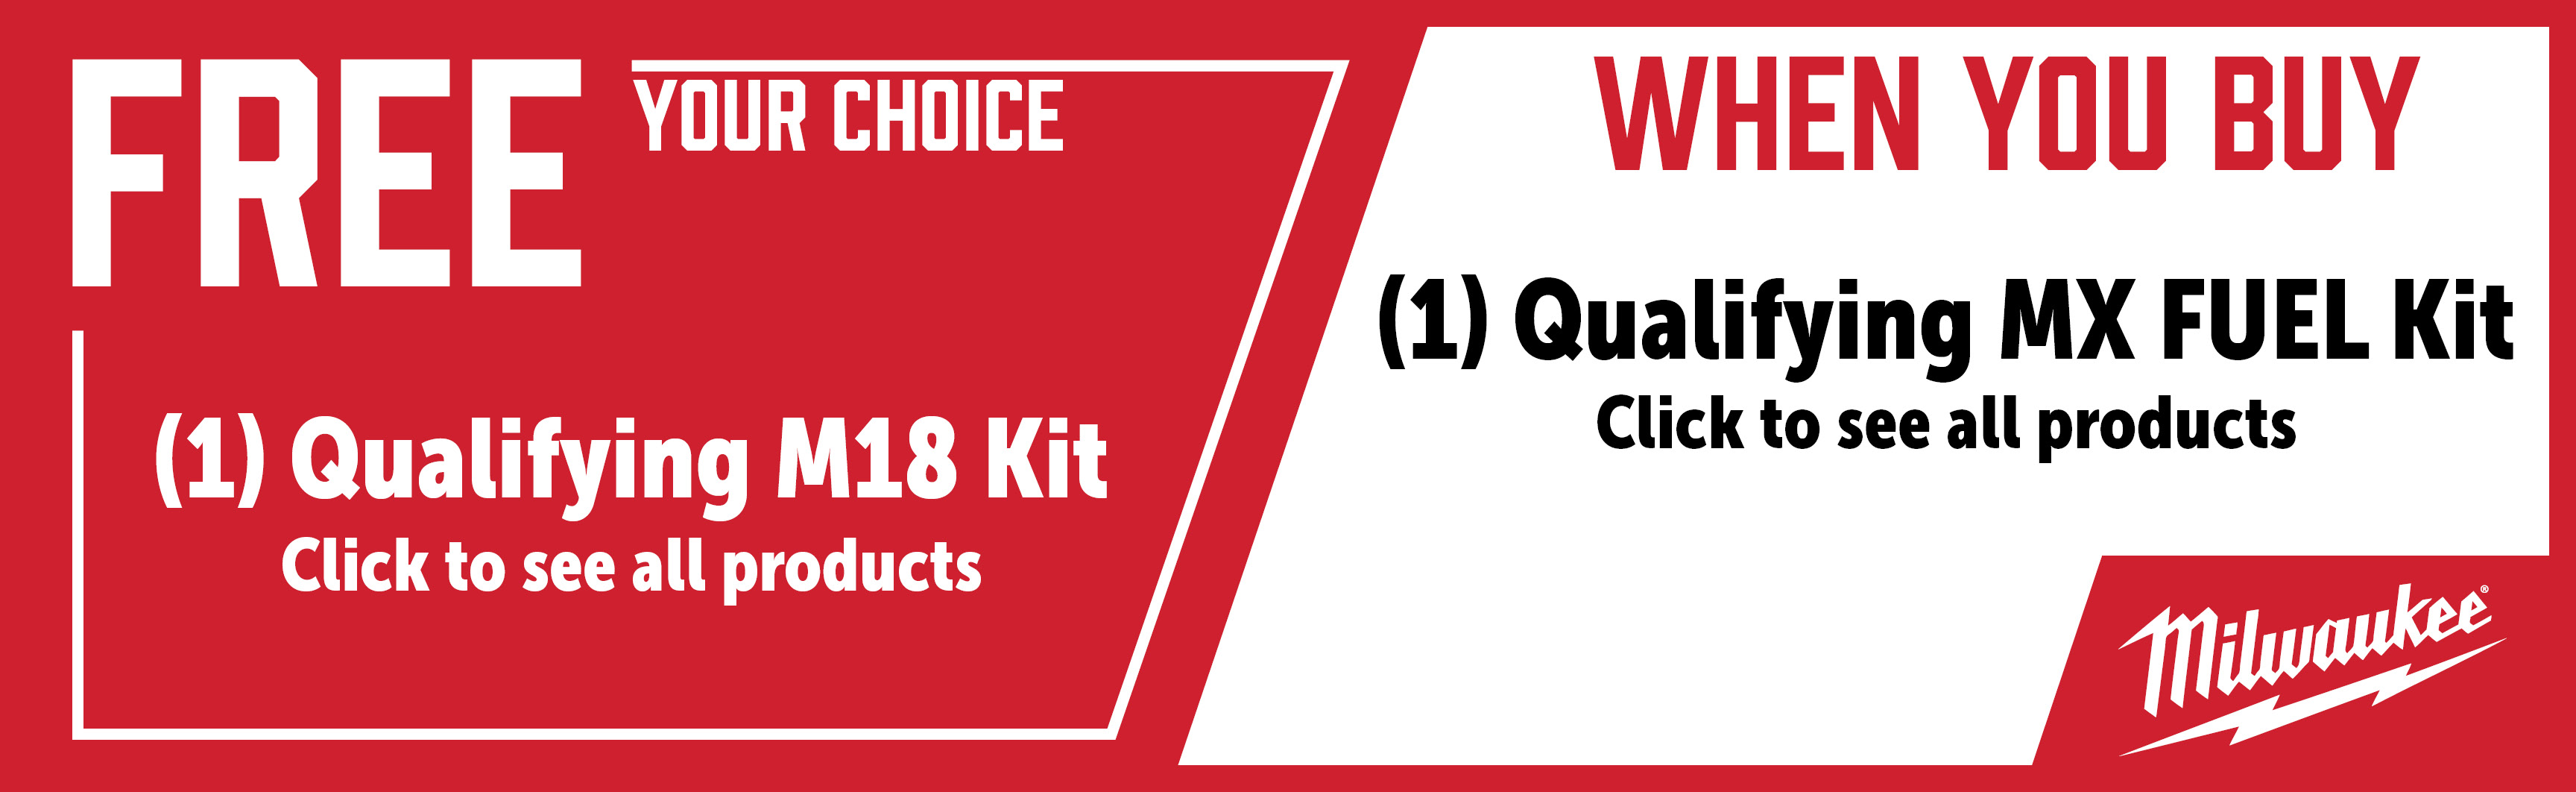 Milwaukee Feb-Apr: Buy a Select MX Fuel Kit and Get a Qualifying FREE M18 Fuel Kit